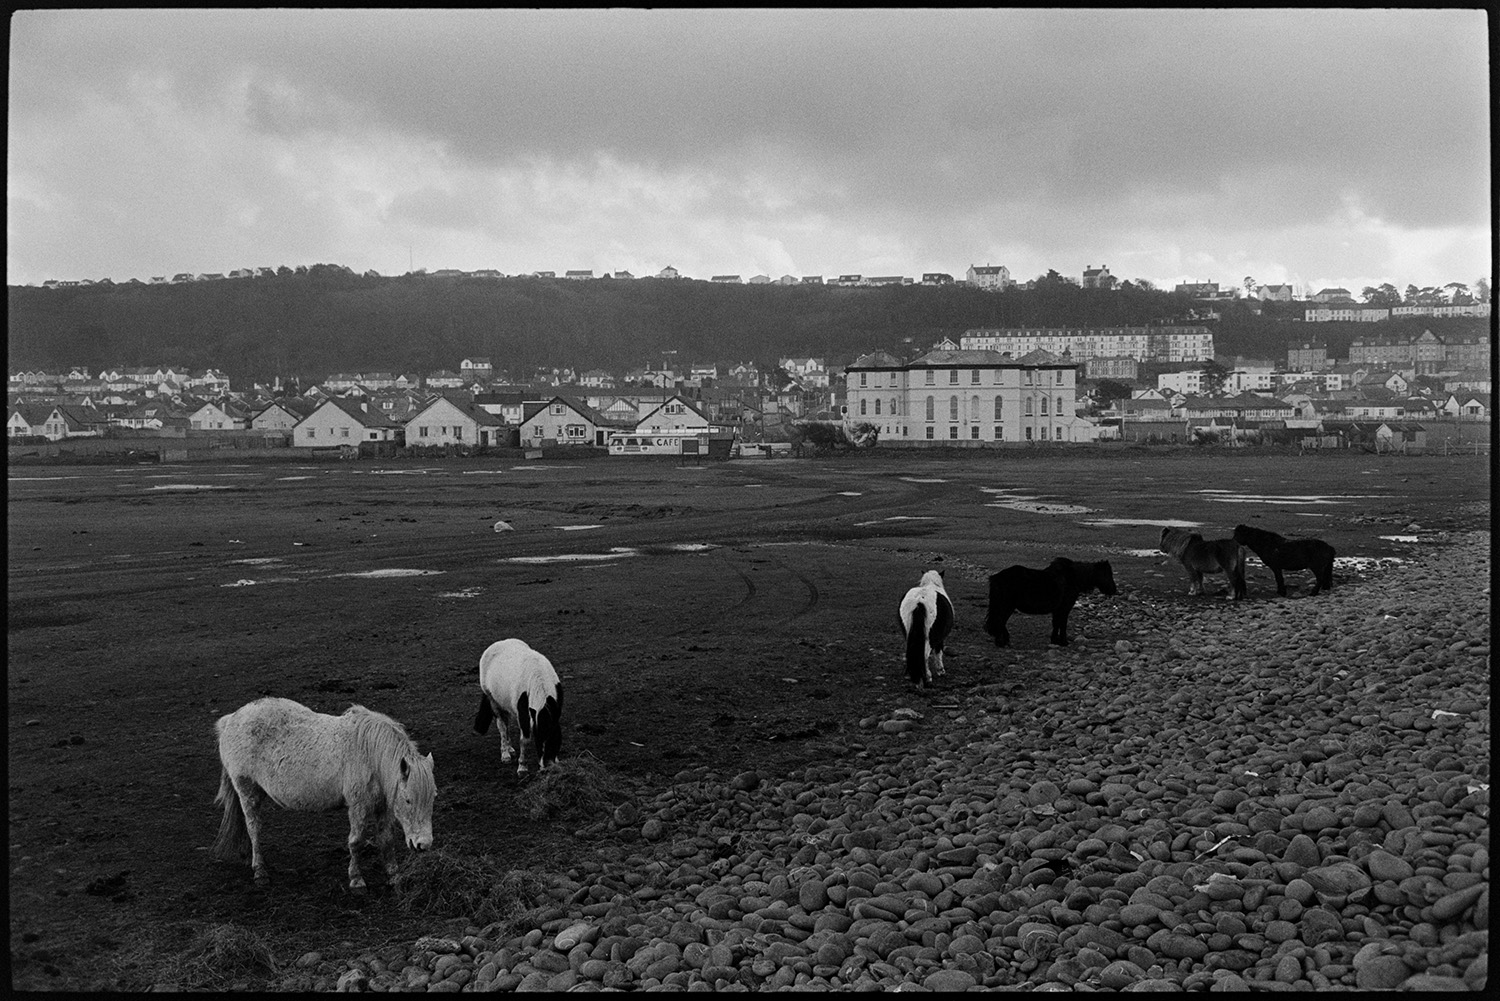 People walking beside stormy sea, leaning on the wind.
[Ponies grazing on the edge of the pebble ridge on Northam Burrows. Views of Westward Ho! Can be seen in the background.]